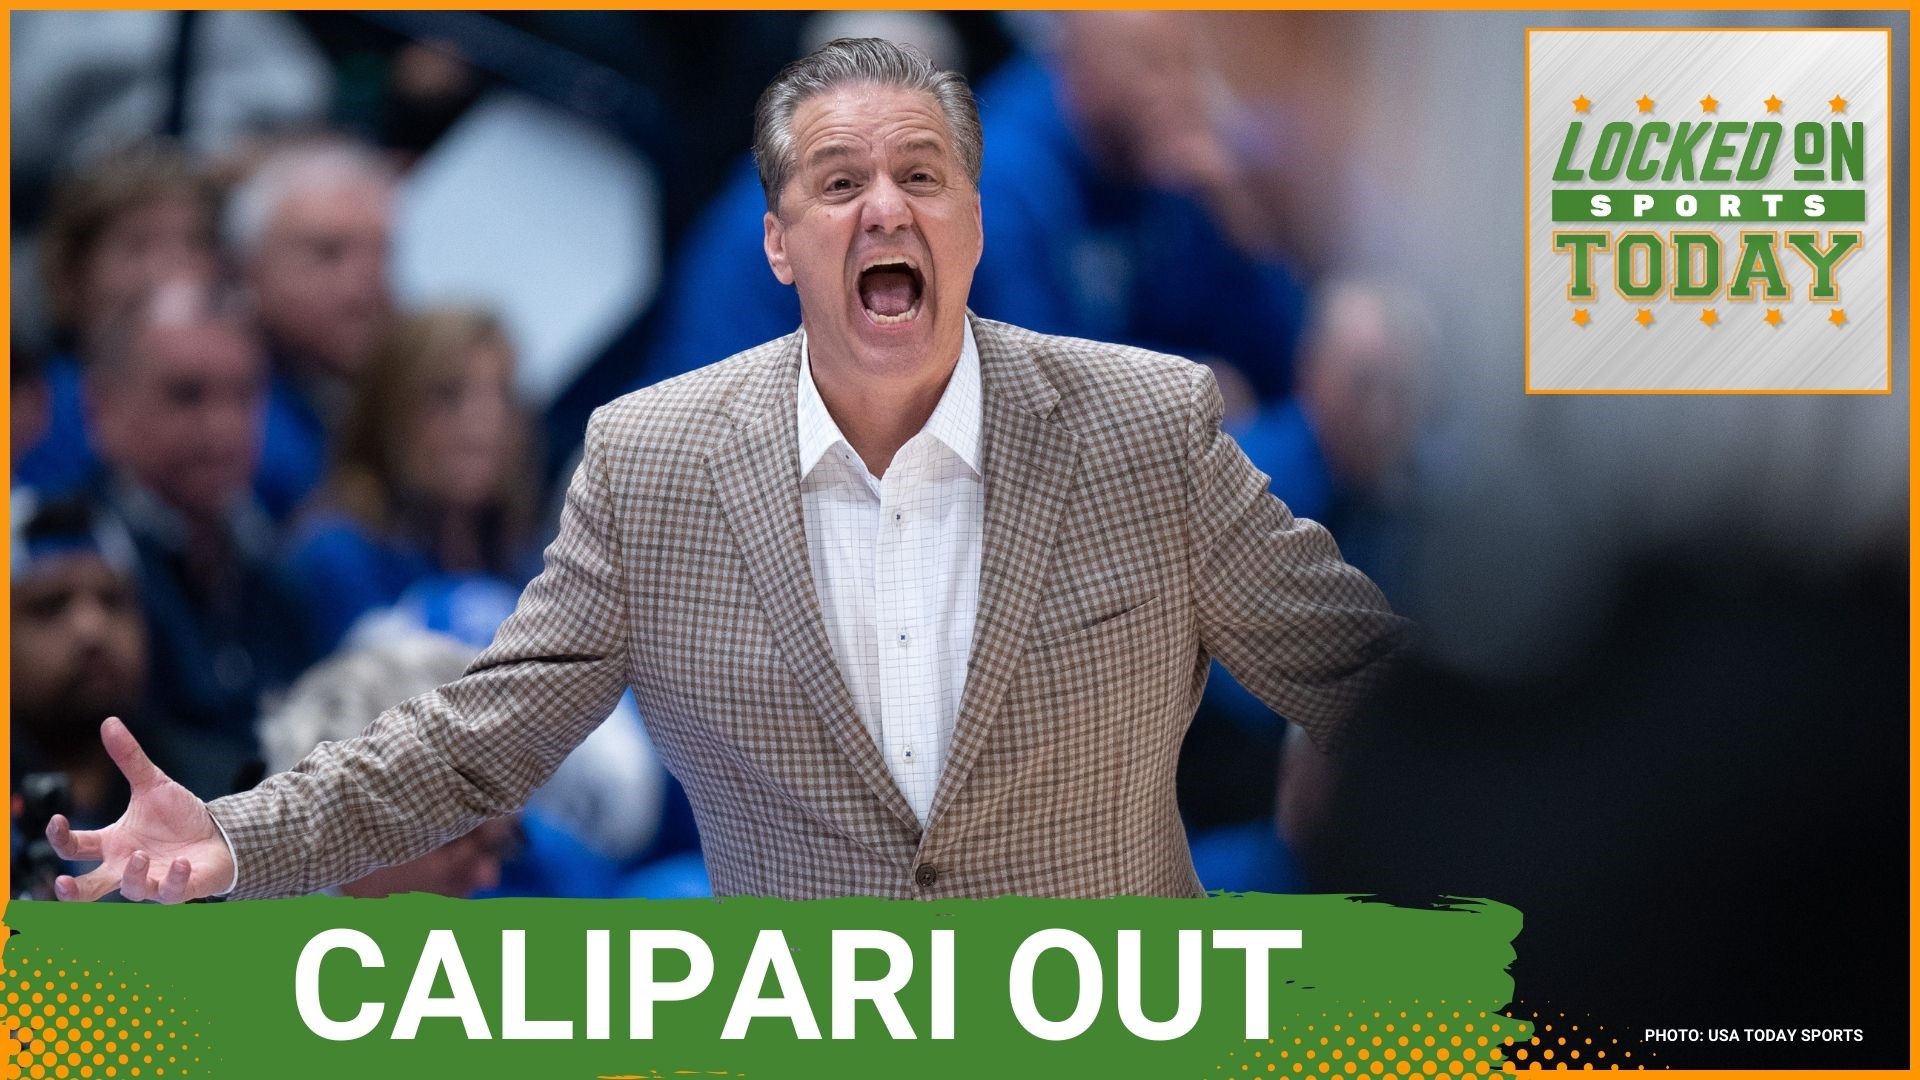 Discussing the day's top sports stories from John Calipari jumping ship from Kentucky to the Mavericks find the equation for success and more.